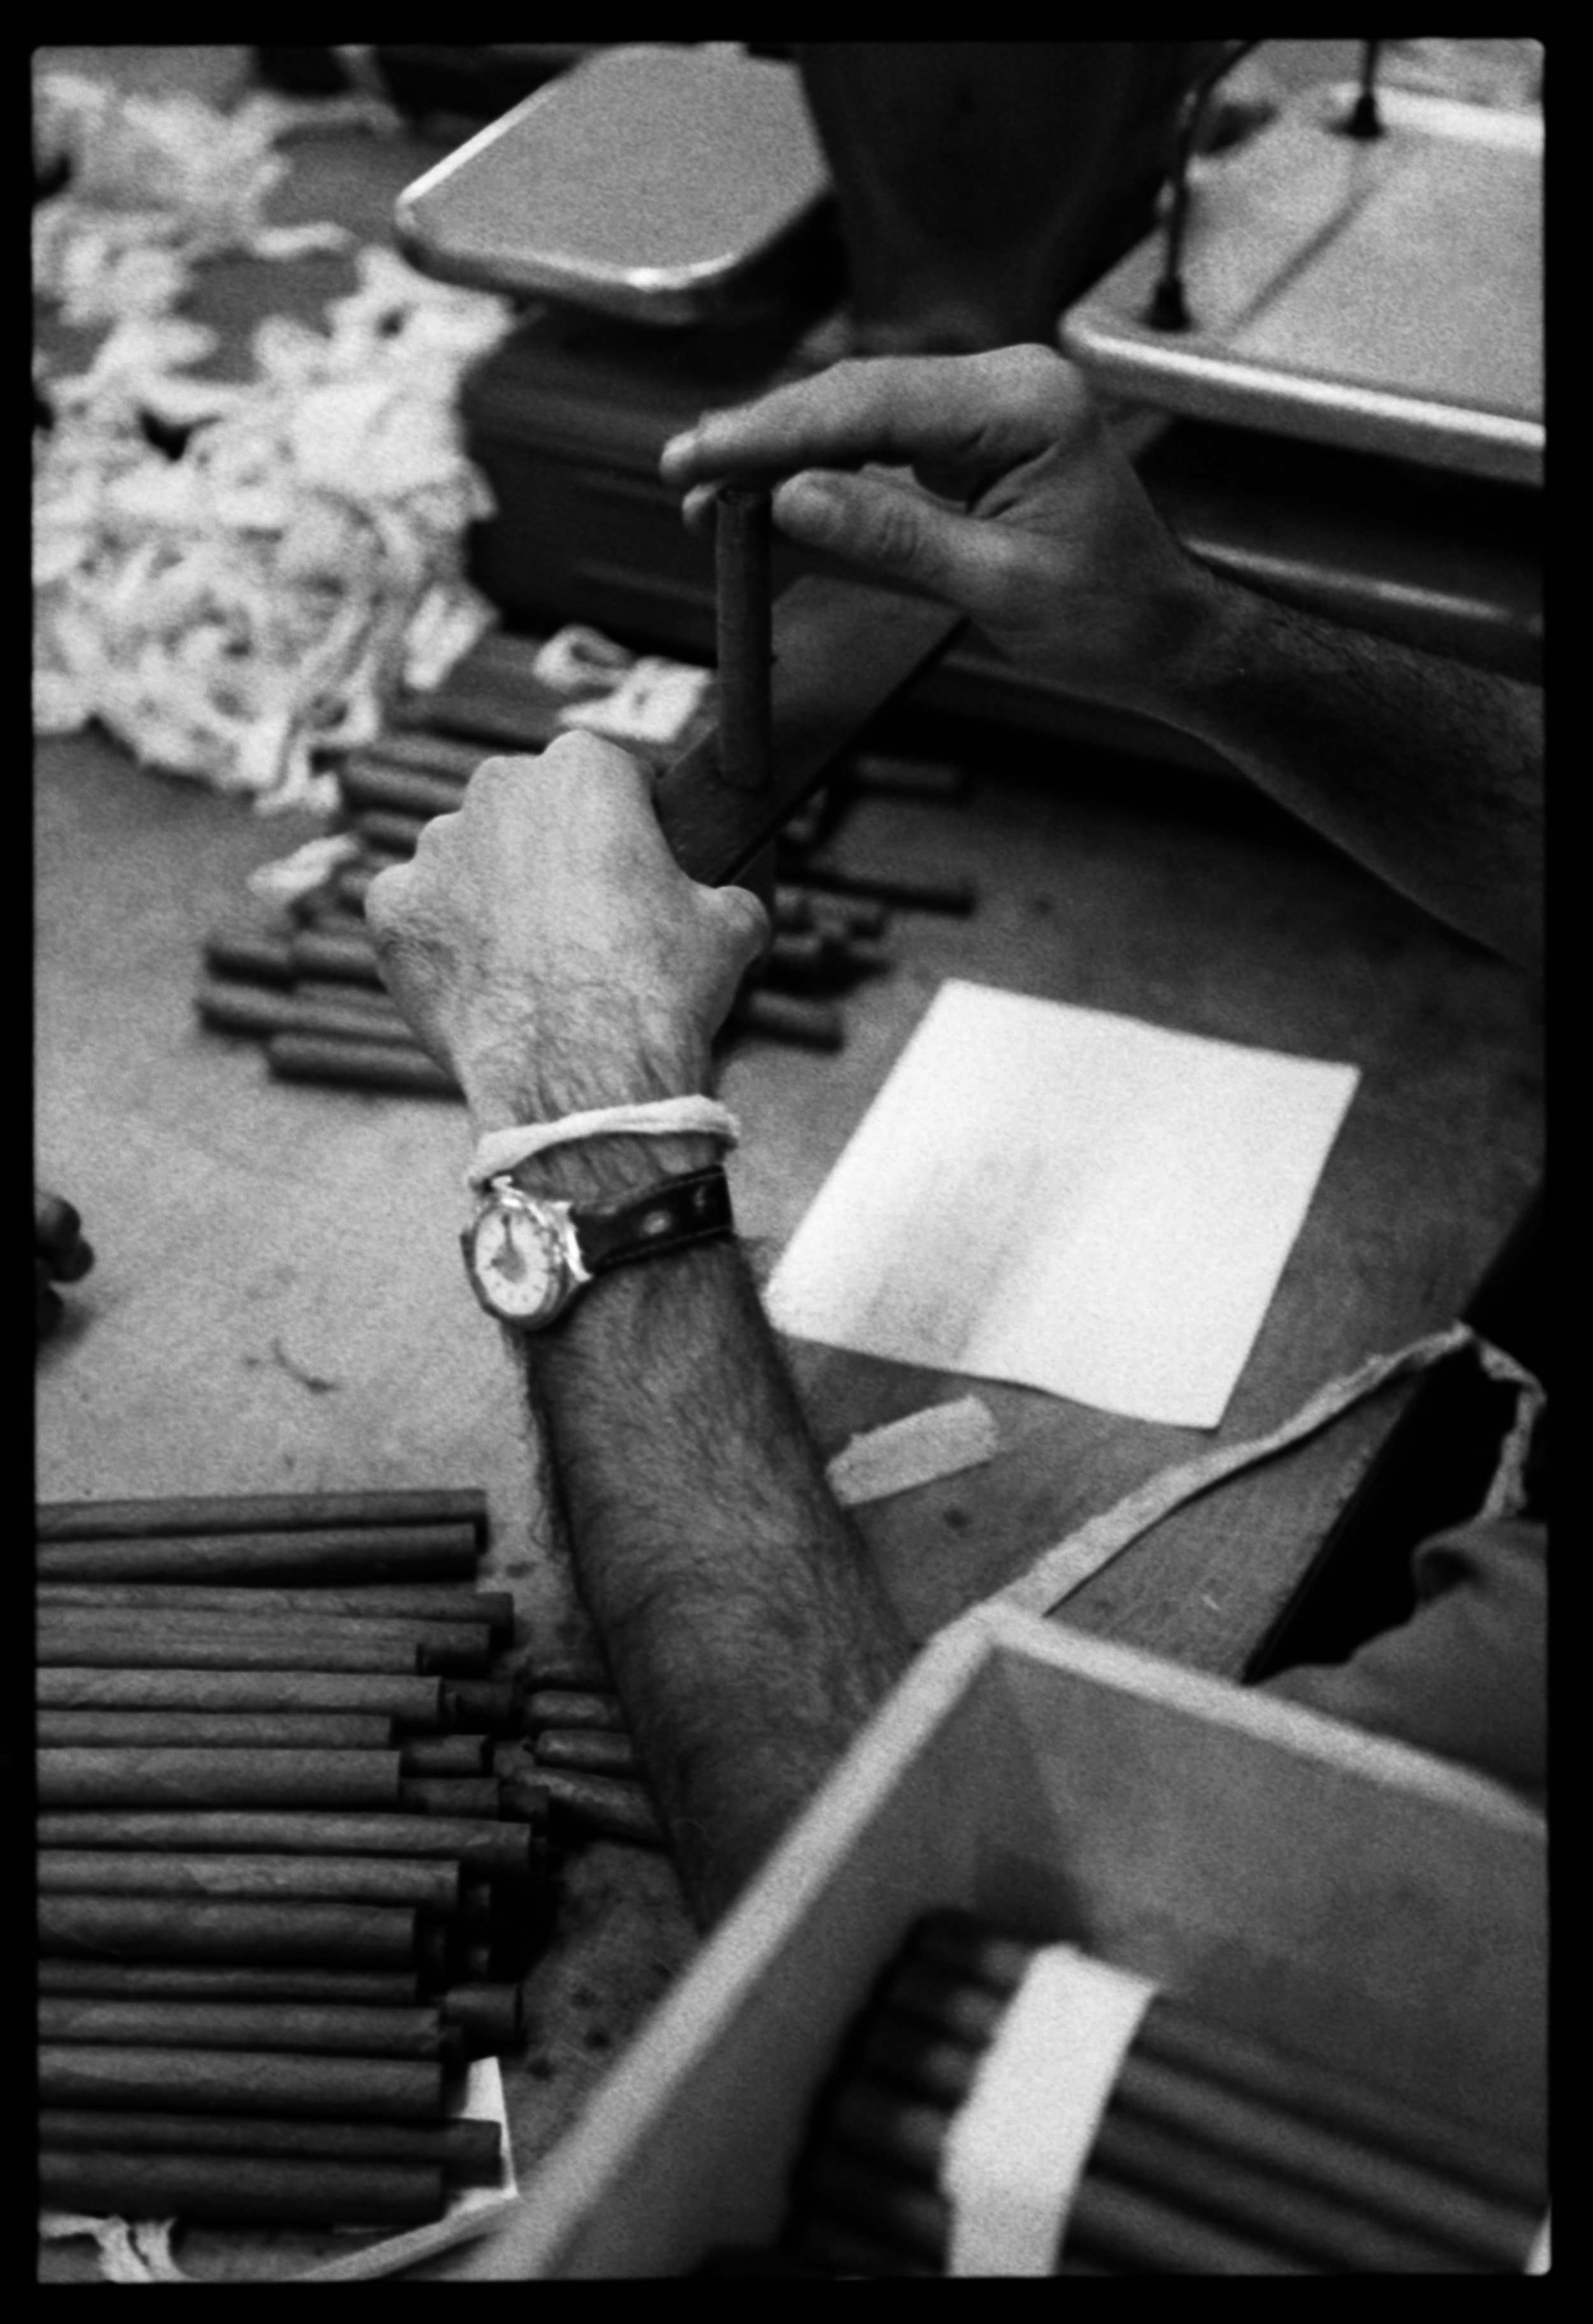  Ring size consistency quality control in the Partagas factory.   